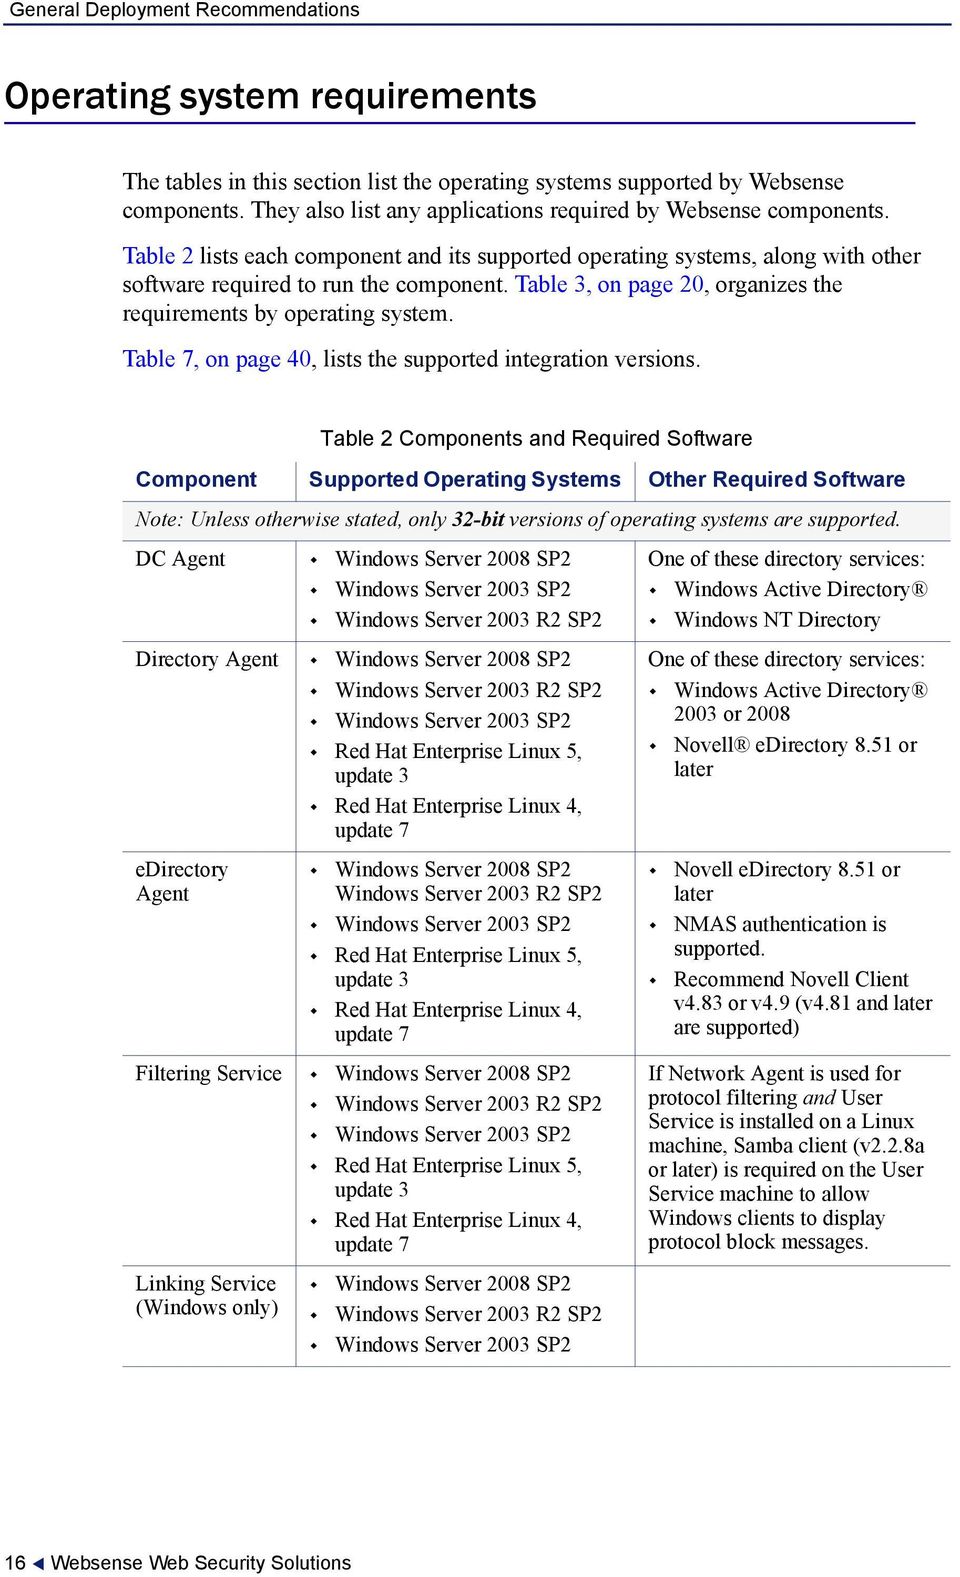 Table 3, on page 20, organizes the requirements by operating system. Table 7, on page 40, lists the supported integration versions.